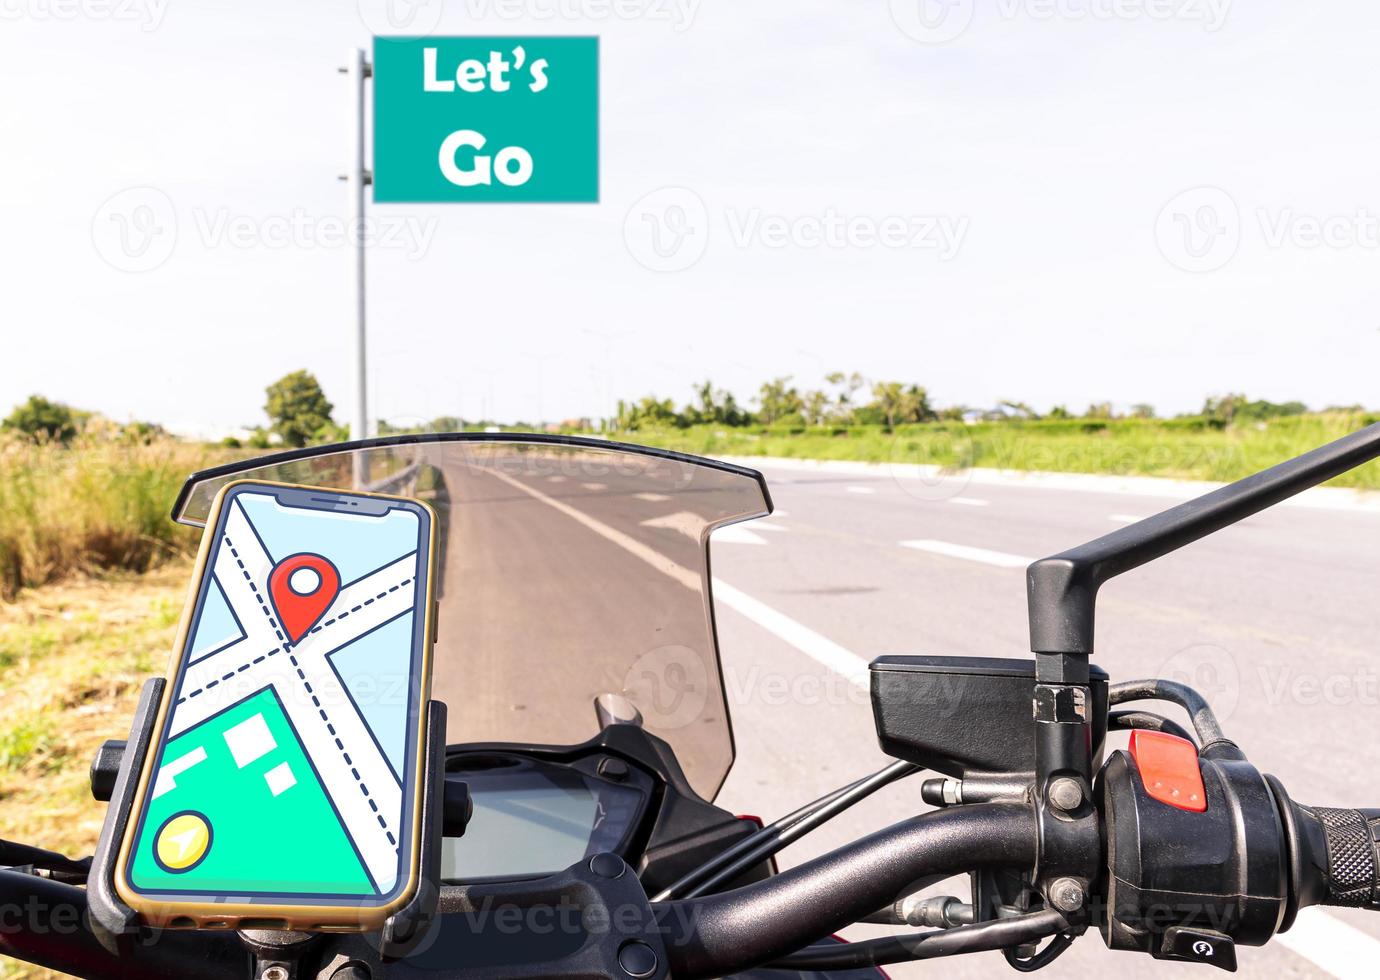 Navigate map on display smartphone on handle bar motorcycle with message Let's Go on green road sign and highway road view photo